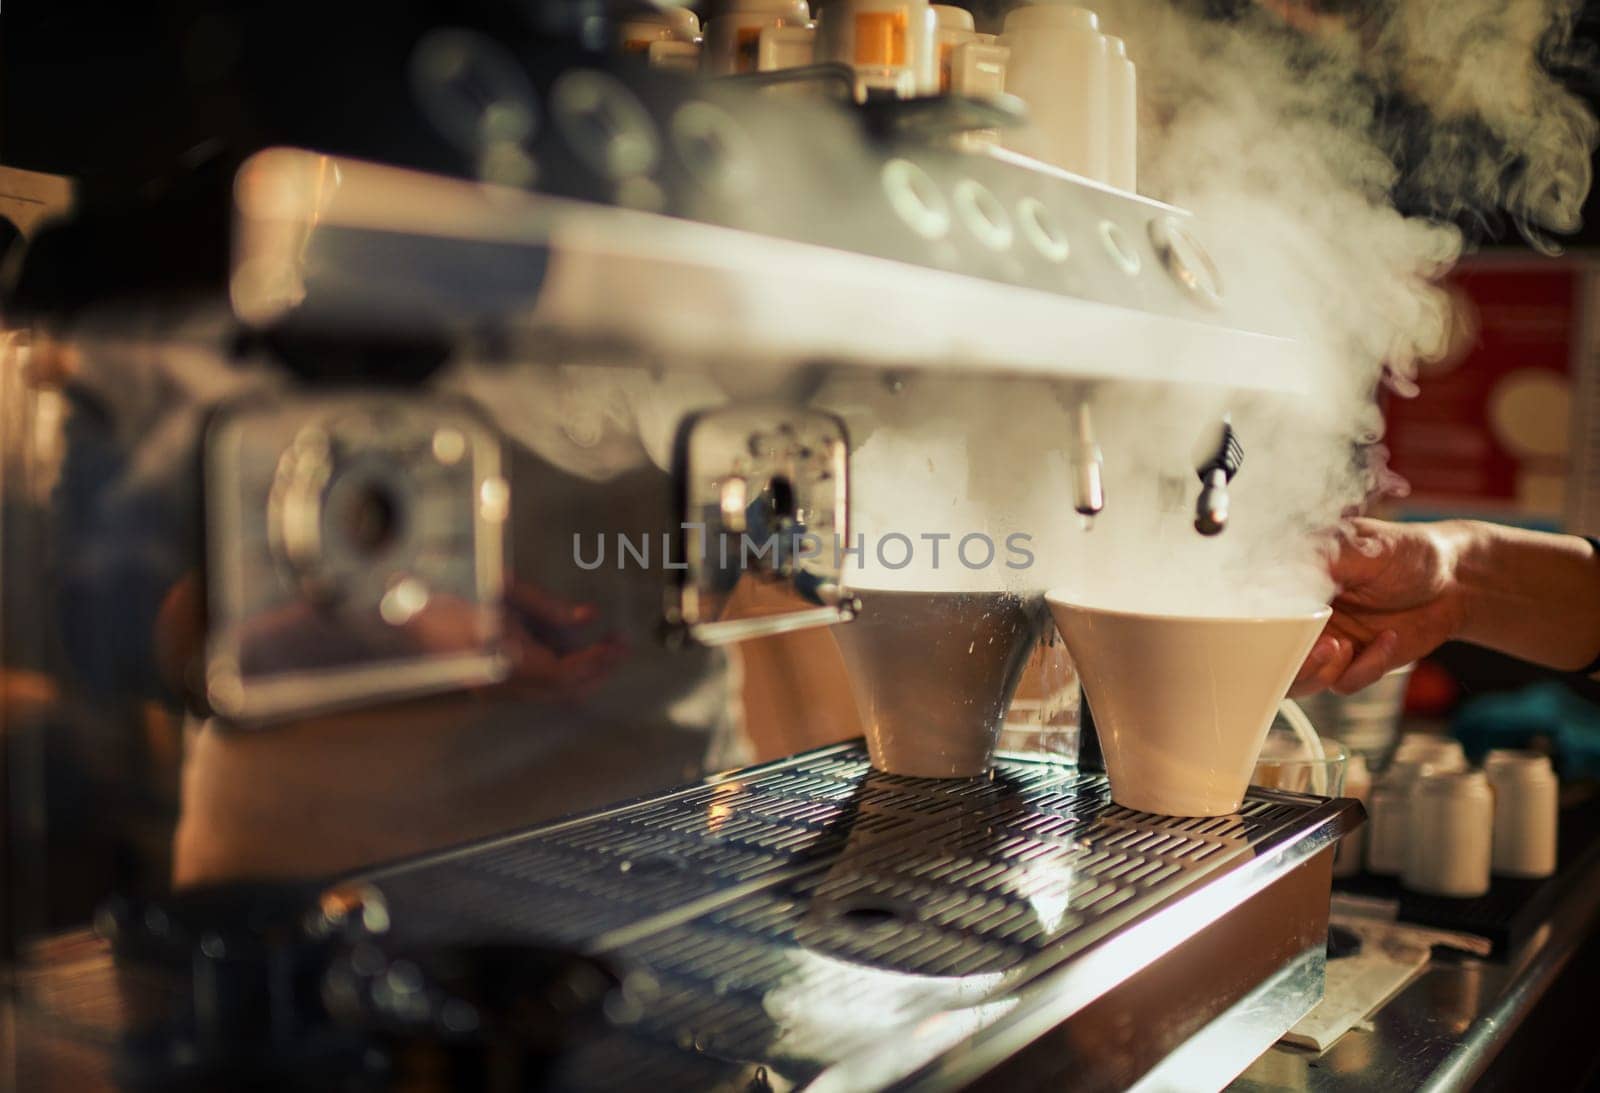 Coffee machine, steam and hands of cafe person, barista or diner waiter making beverage, latte drink or espresso. Tea cup, commerce market shop and restaurant store server with morning hot chocolate.